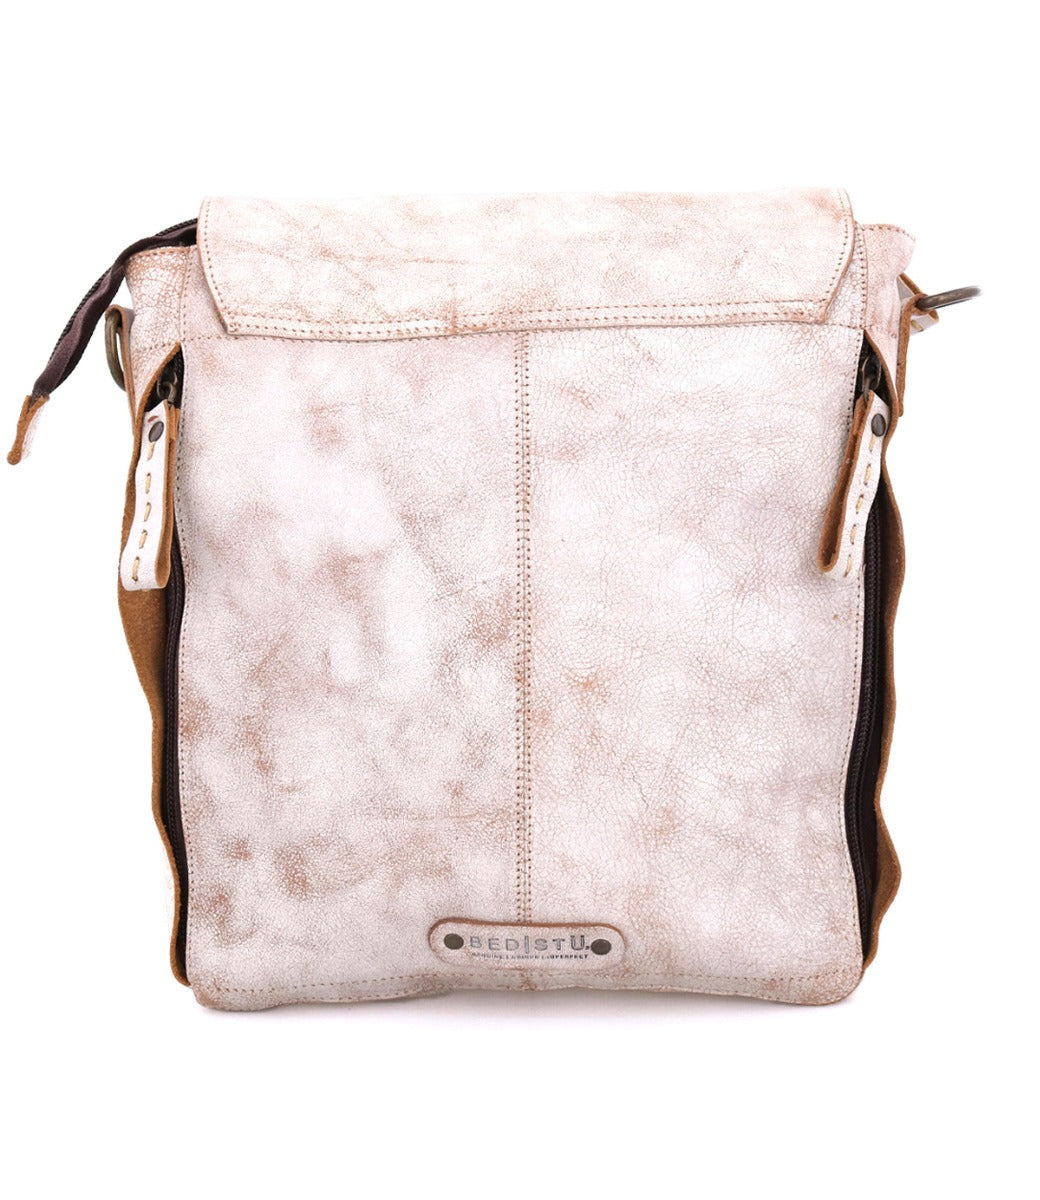 A light beige Bed Stu Ainhoa LTC crossbody handbag with distressed finish and dark brown accents, isolated on a white background.